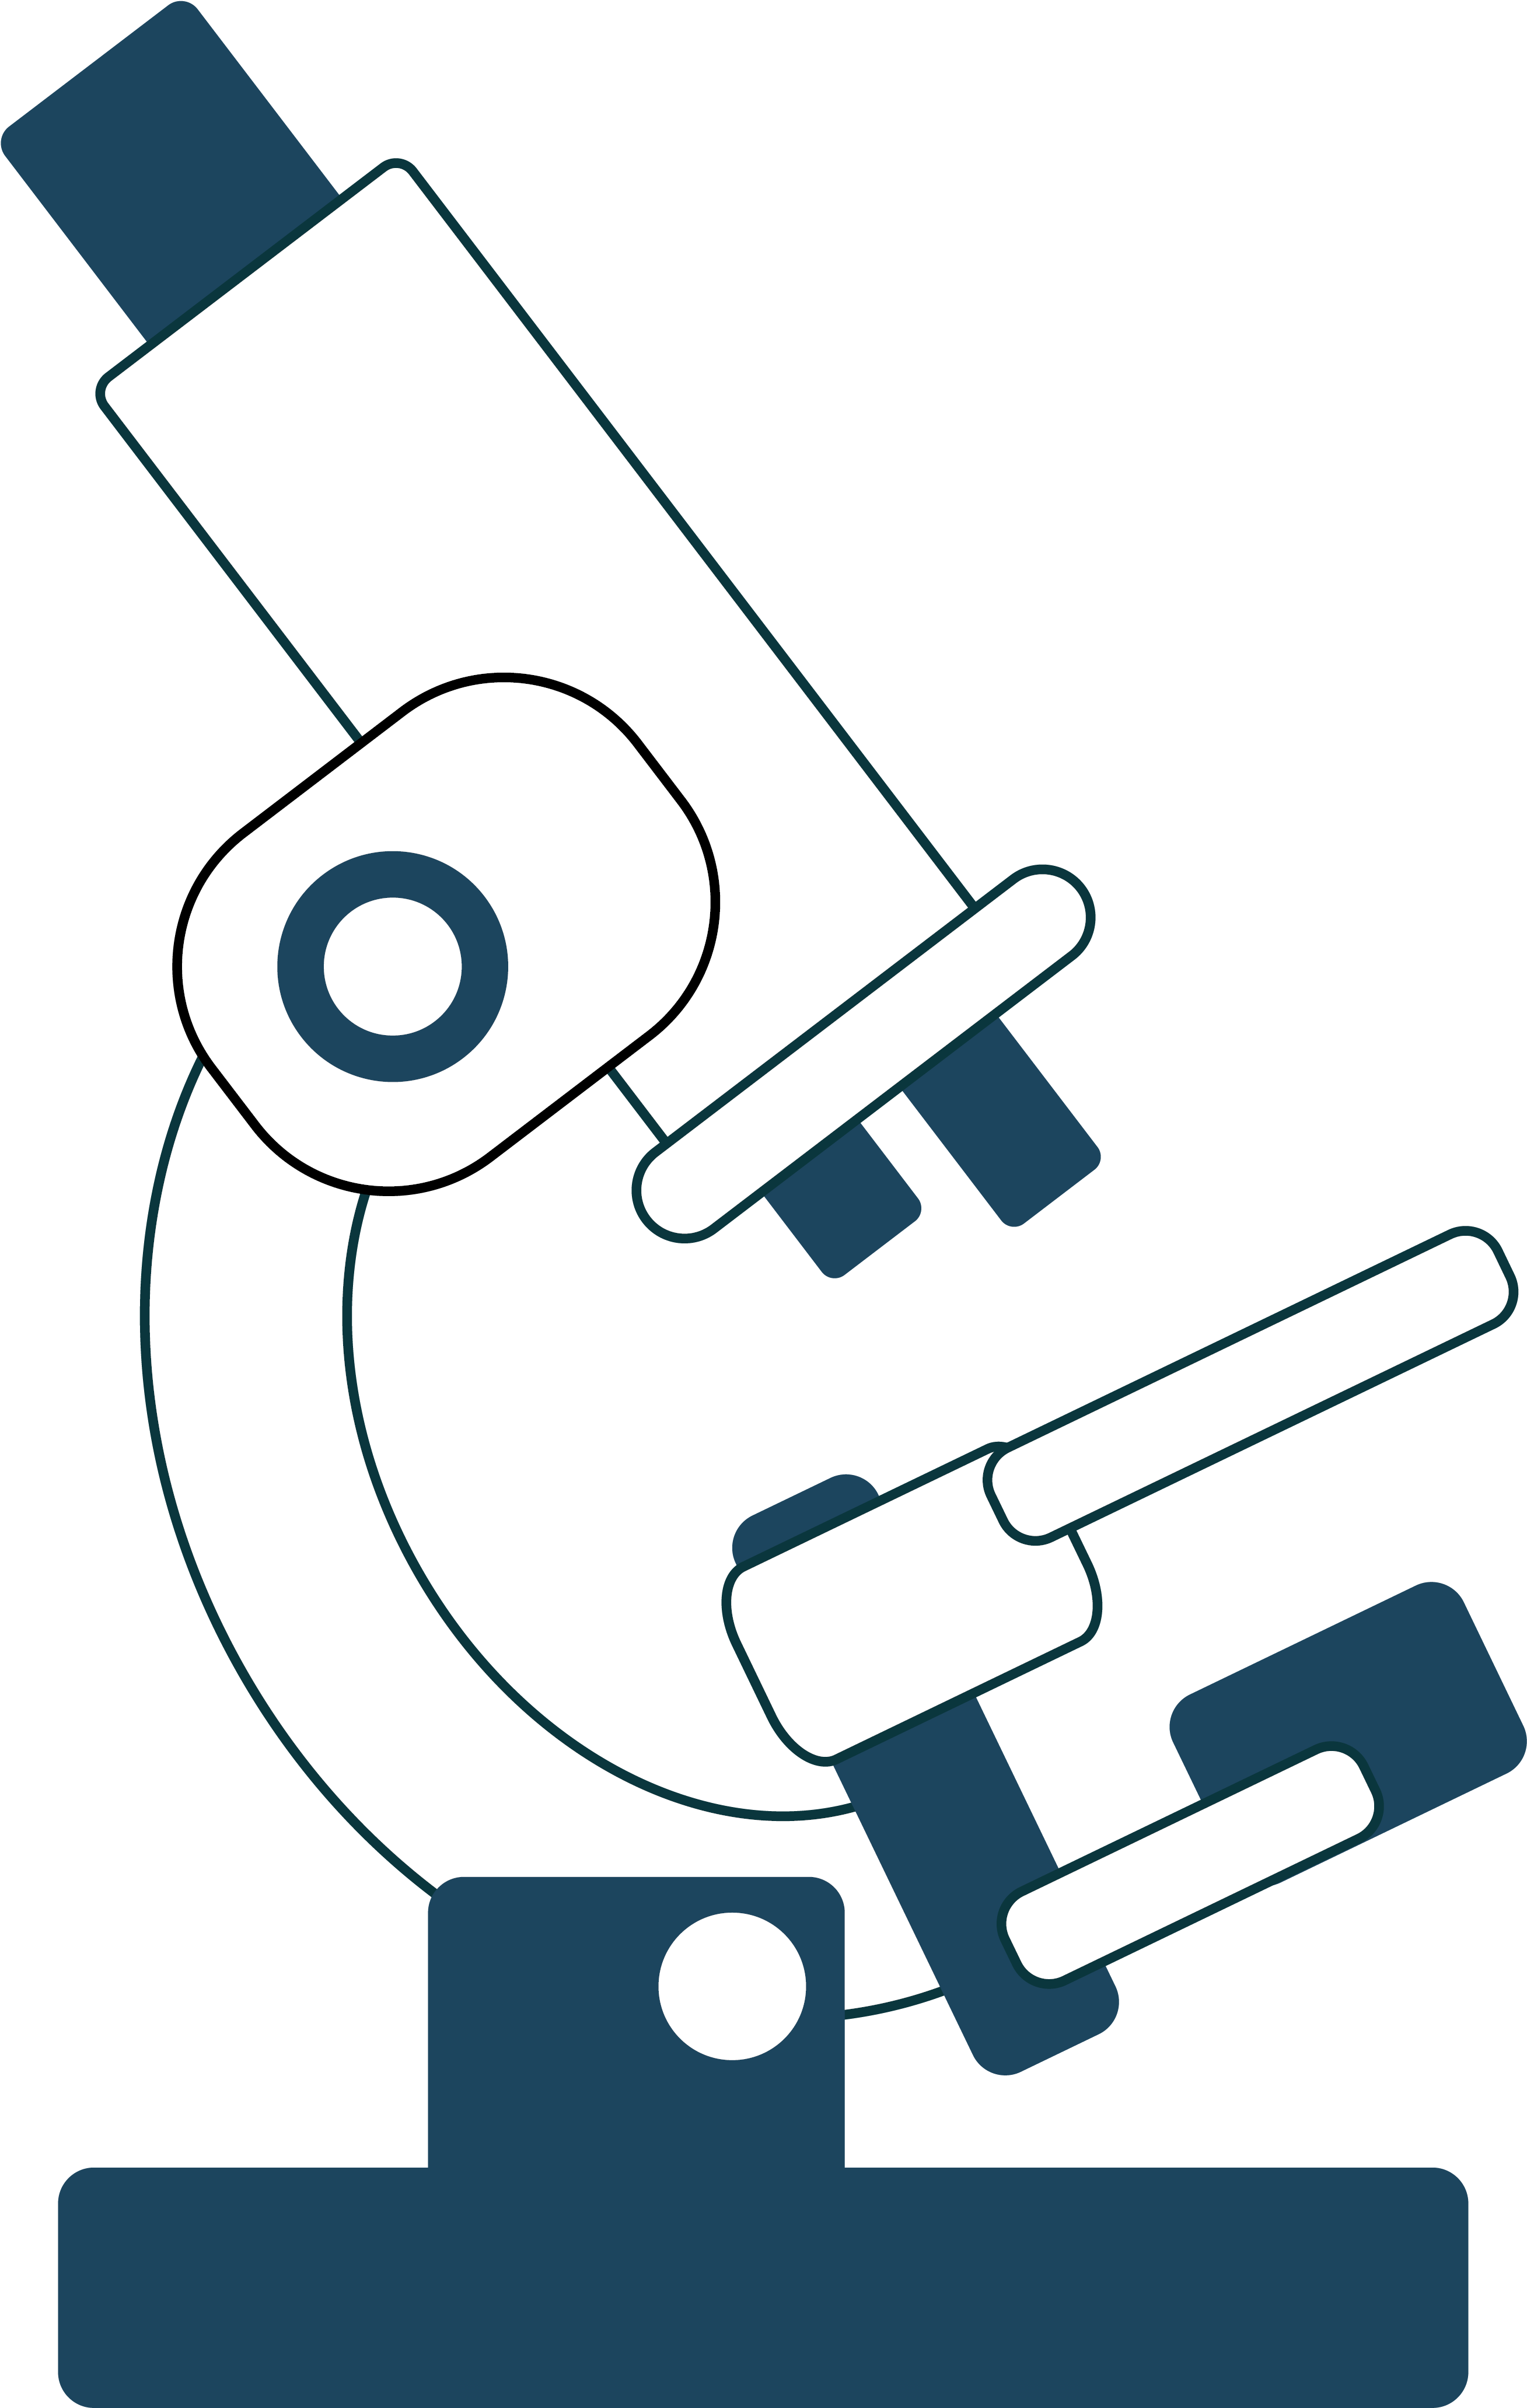 Research Underway Using Ohs Data - Transparent Background Microscope Clipart (4167x4167)